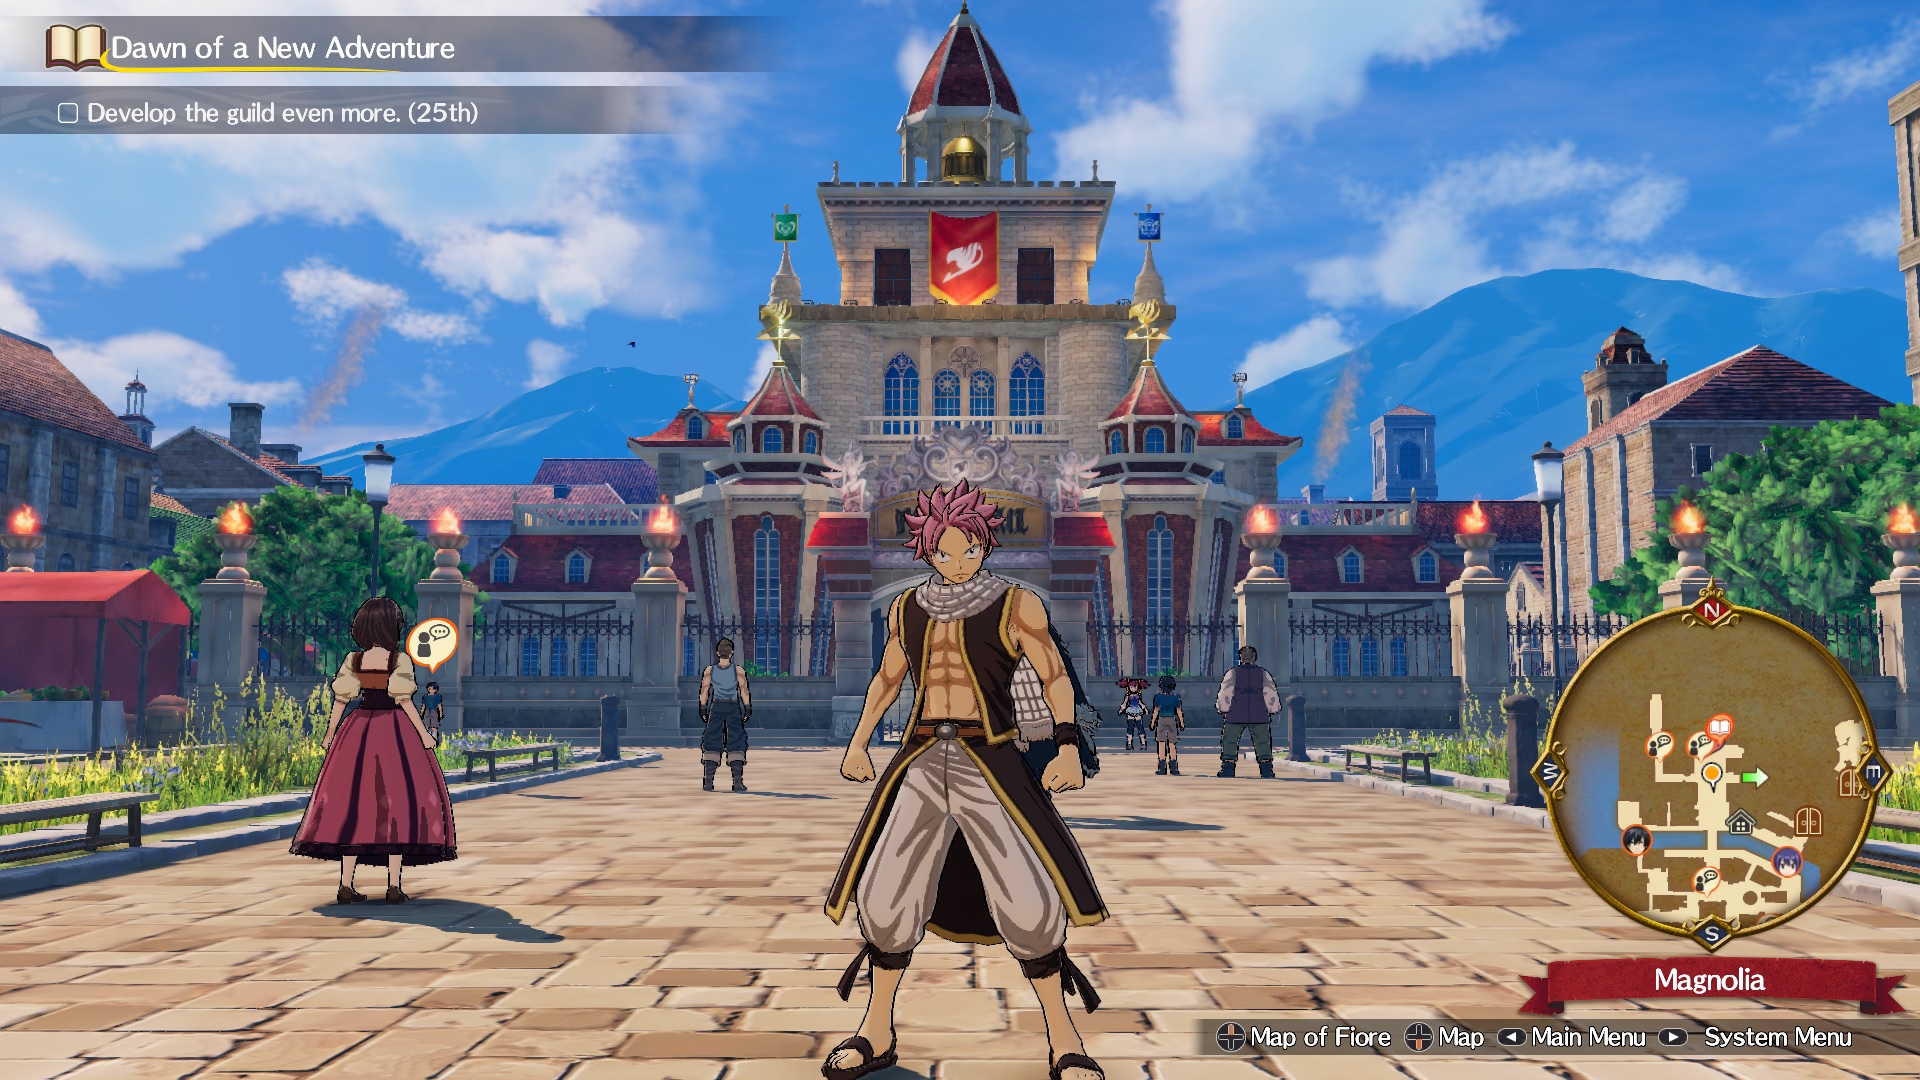 Fairy Tail (Video Game), Fairy Tail Wiki